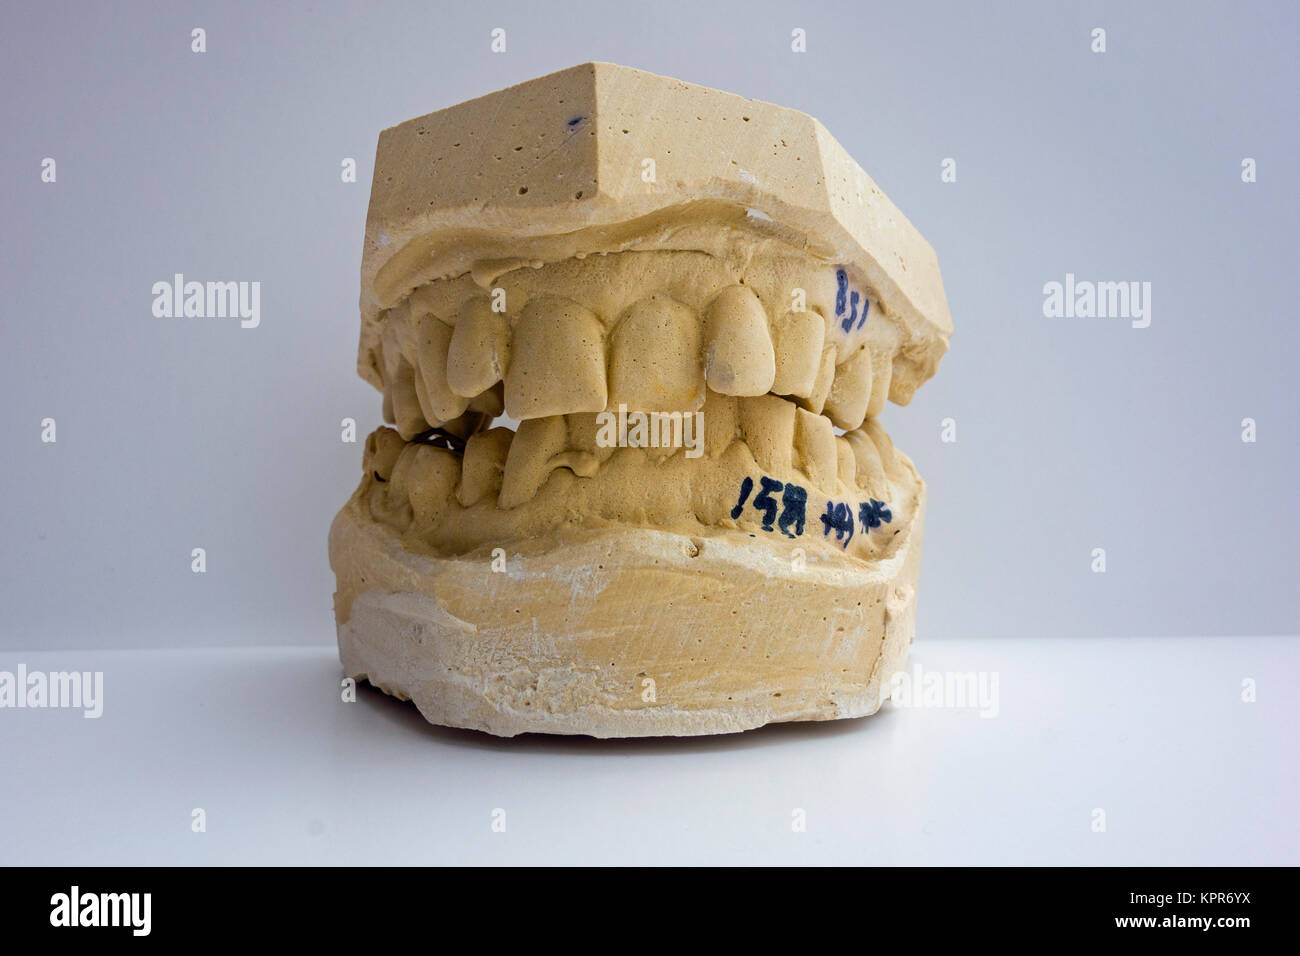 A mold , mould or impression of a man's teeth showing an overbite Stock Photo